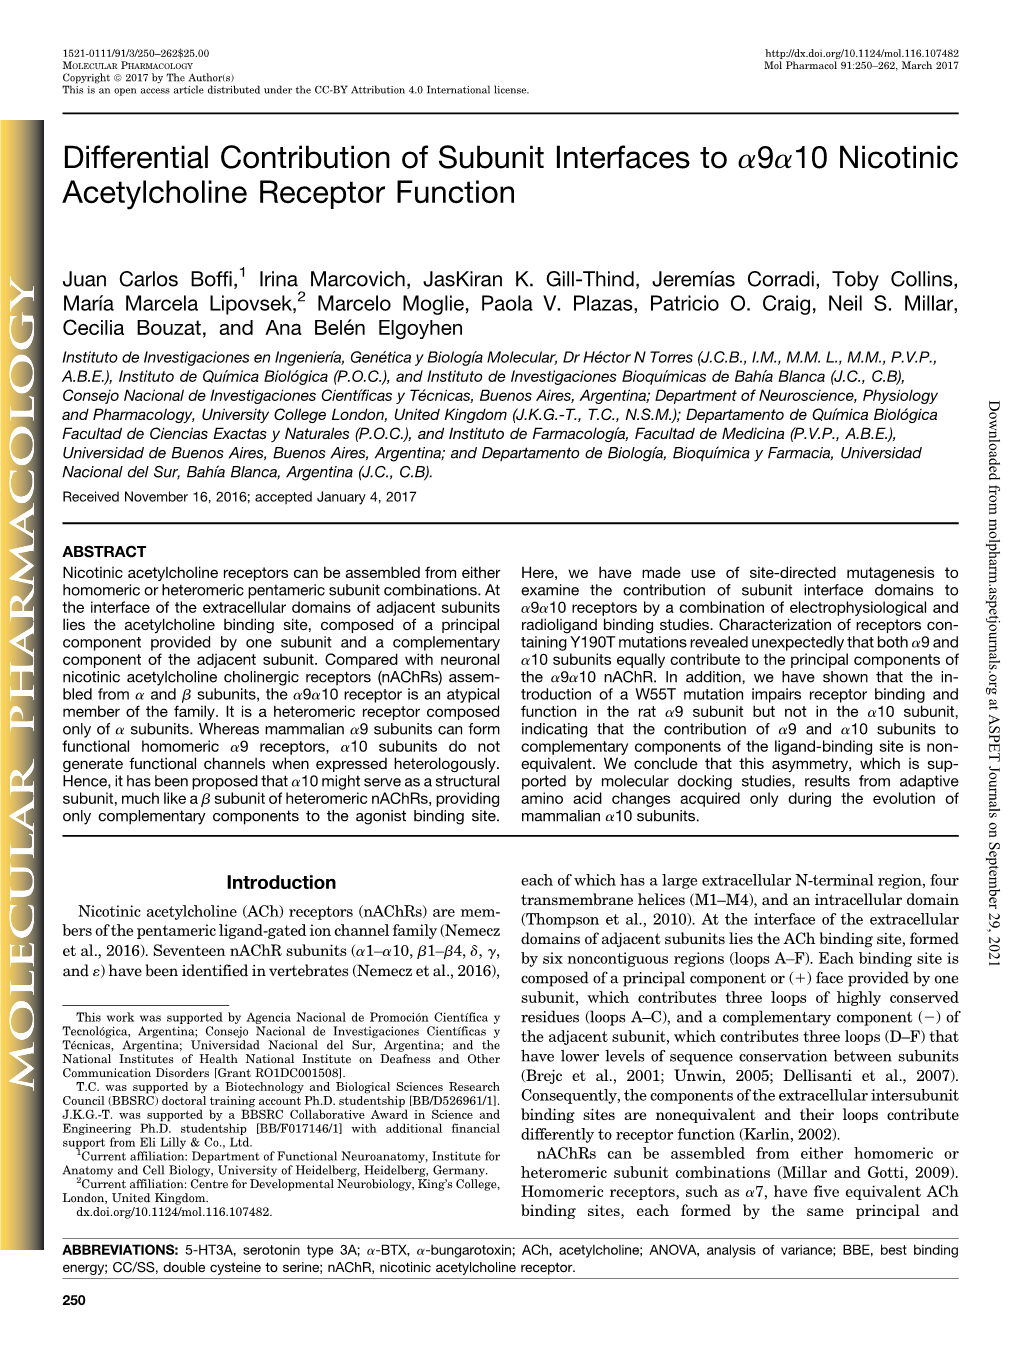 Differential Contribution of Subunit Interfaces to Α9α10 Nicotinic Acetylcholine Receptor Function